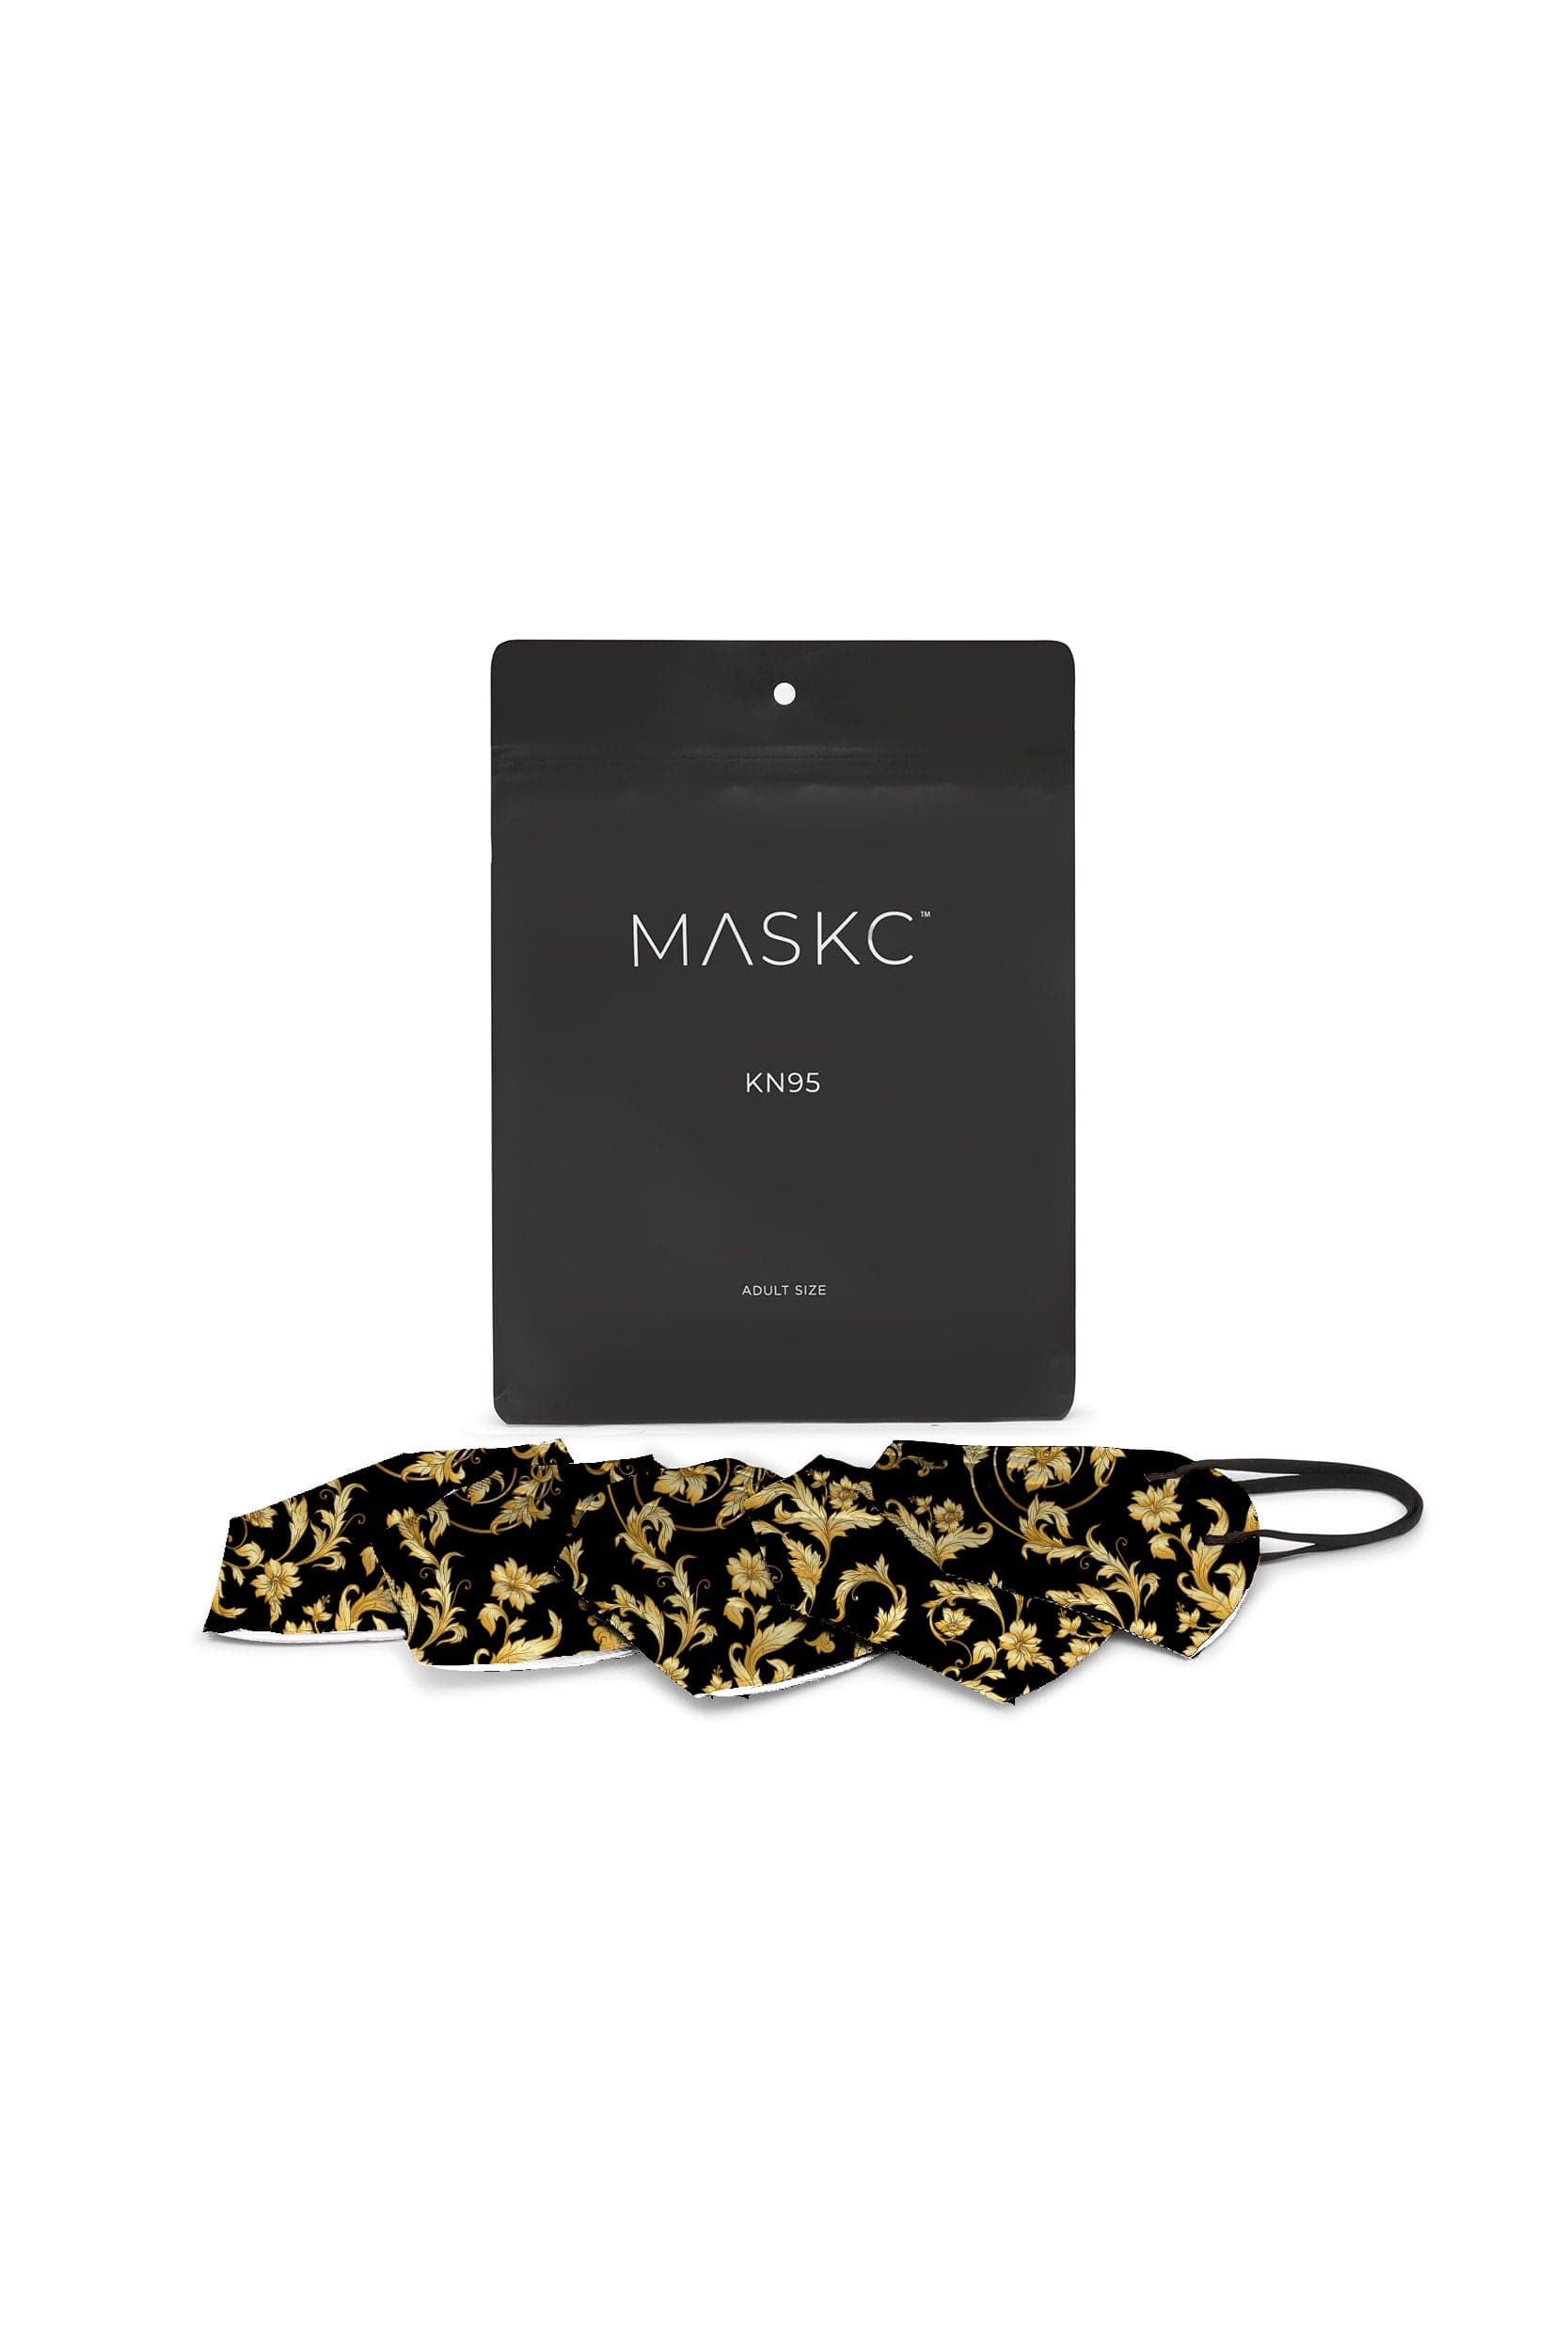 Luxury KN95 Face Masks - 10 Pack